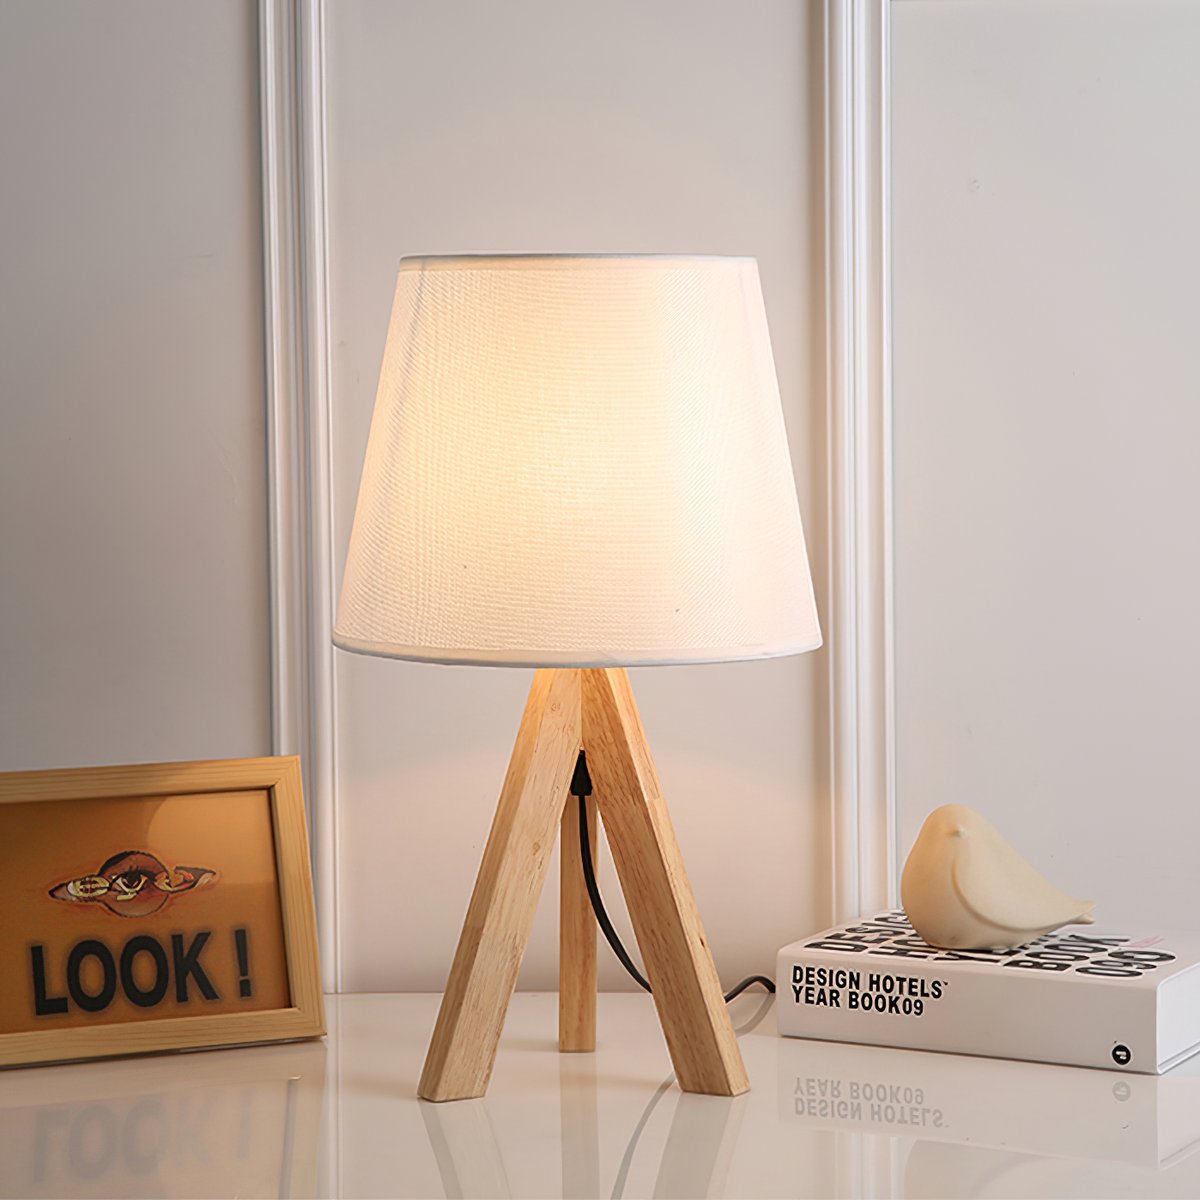 Enjoy the natural beauty and elegance of this Lifland Solid Wood Table Lamp! Handcrafted from high-quality solid wood and contemporary design, it is a masterpiece and perfect accessory for your living space.
mooielight.com/product/liflan…
#Mooielight #Tablelamp #art #design #woodlamp